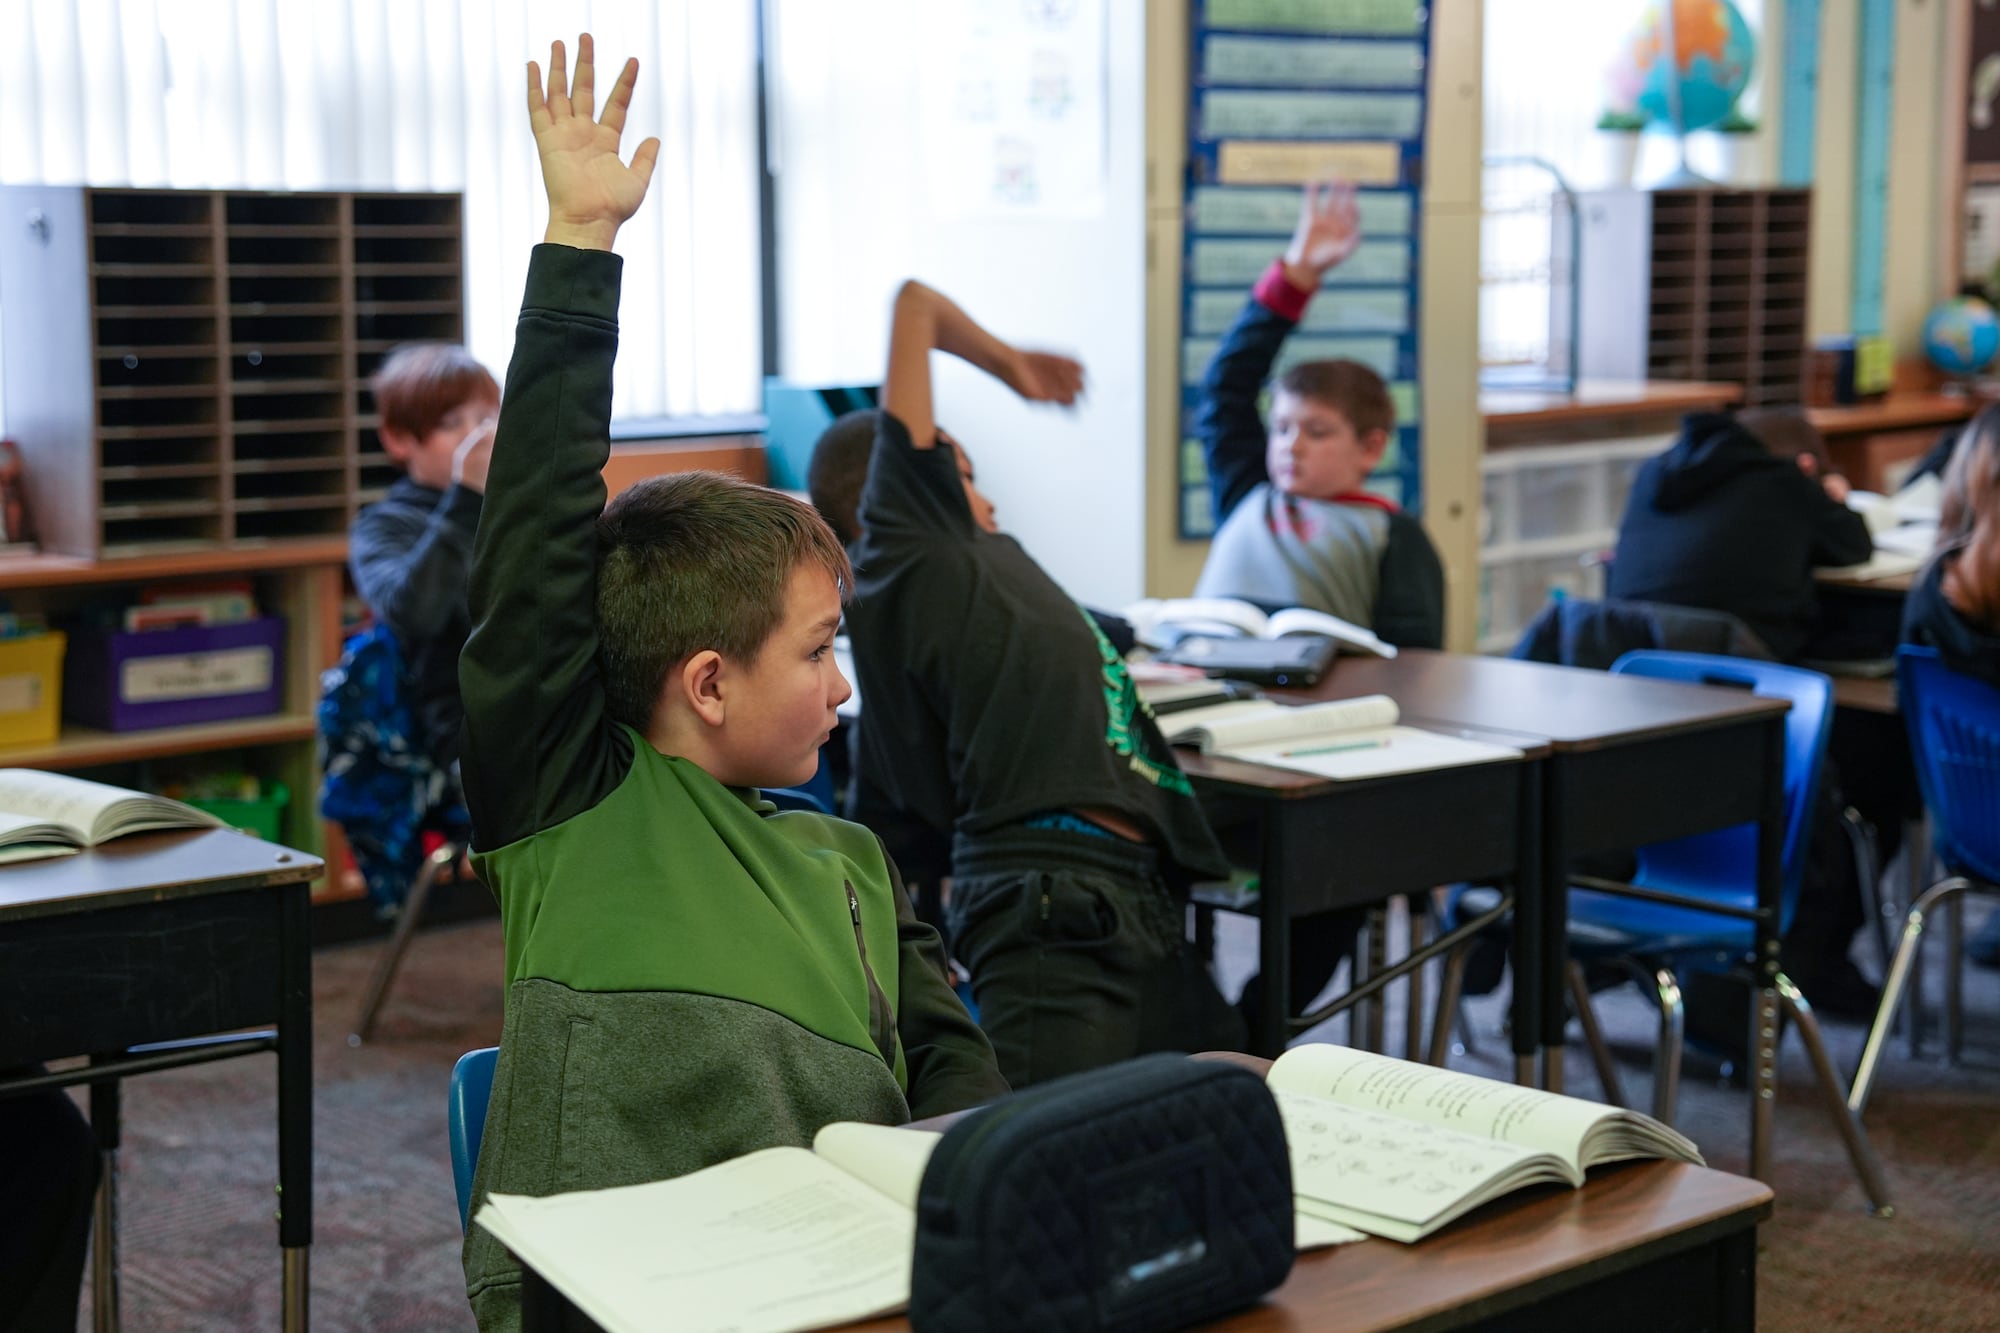 A group of young students sitting at their desks raise their hands in a classroom.